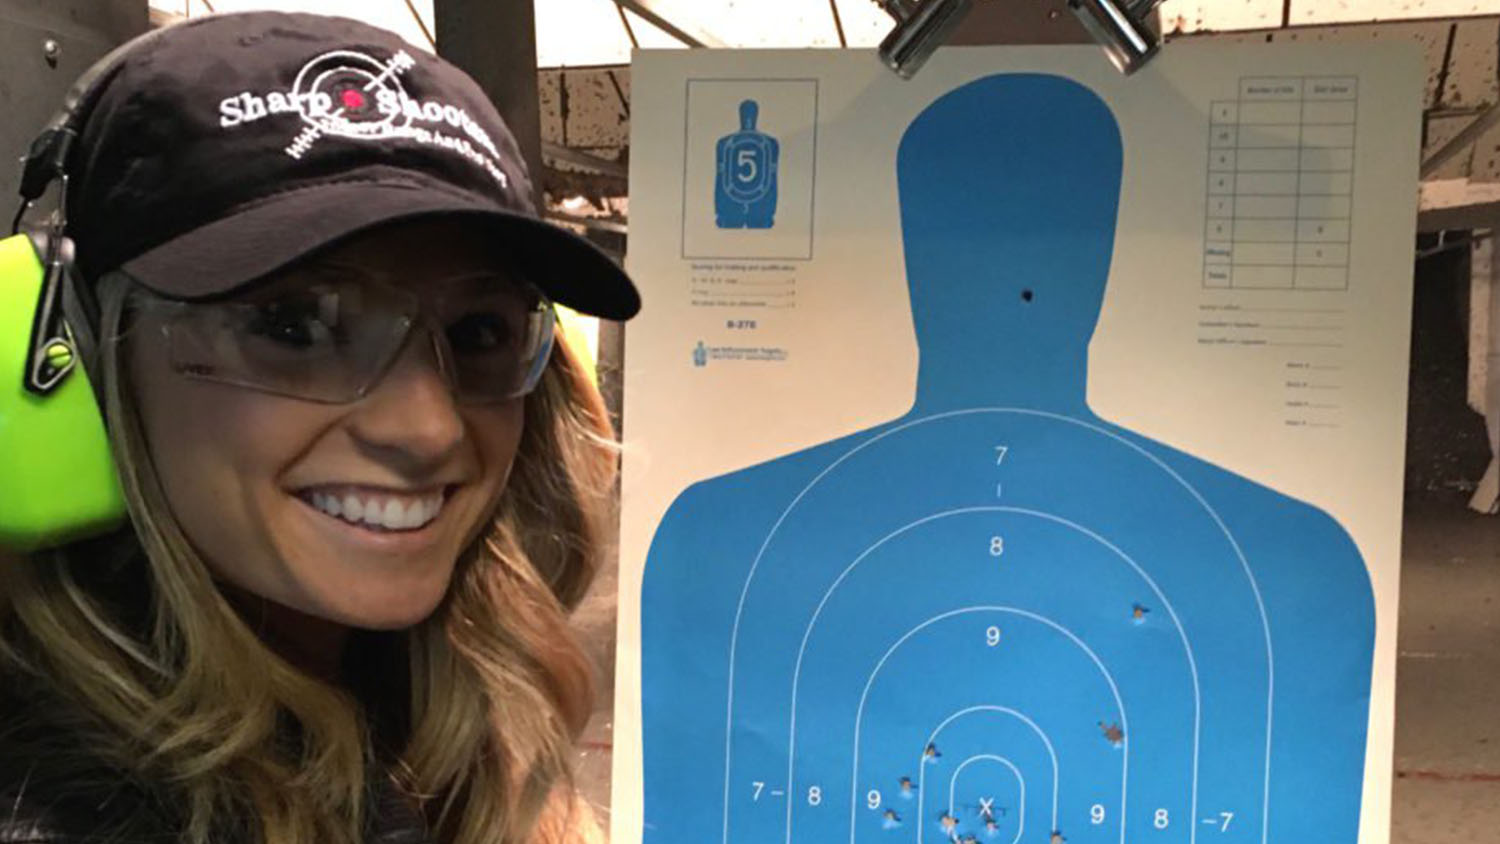 I Finally Shot a Gun for the First Time and Learned It's So Much More Than Just Hitting the Target